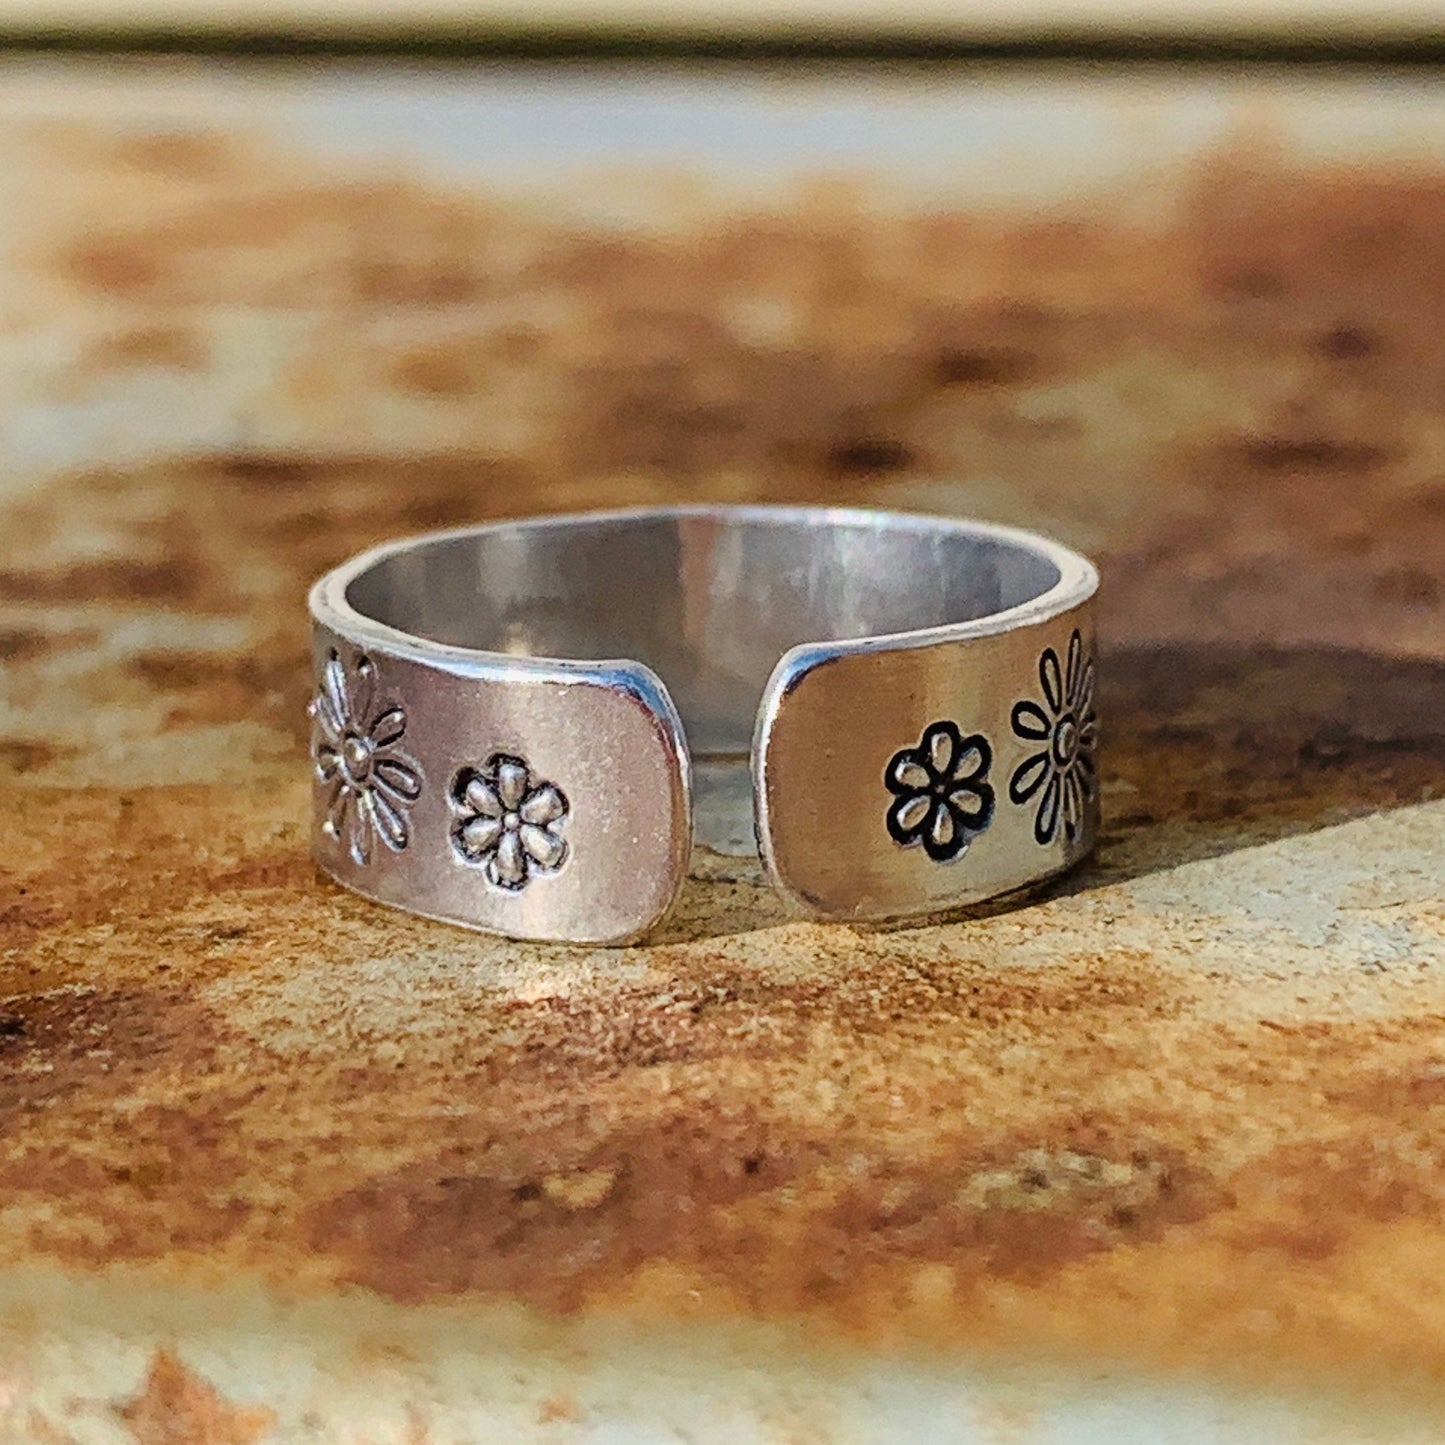 Daisy Flowers - Hand Stamped (Midi) Ring